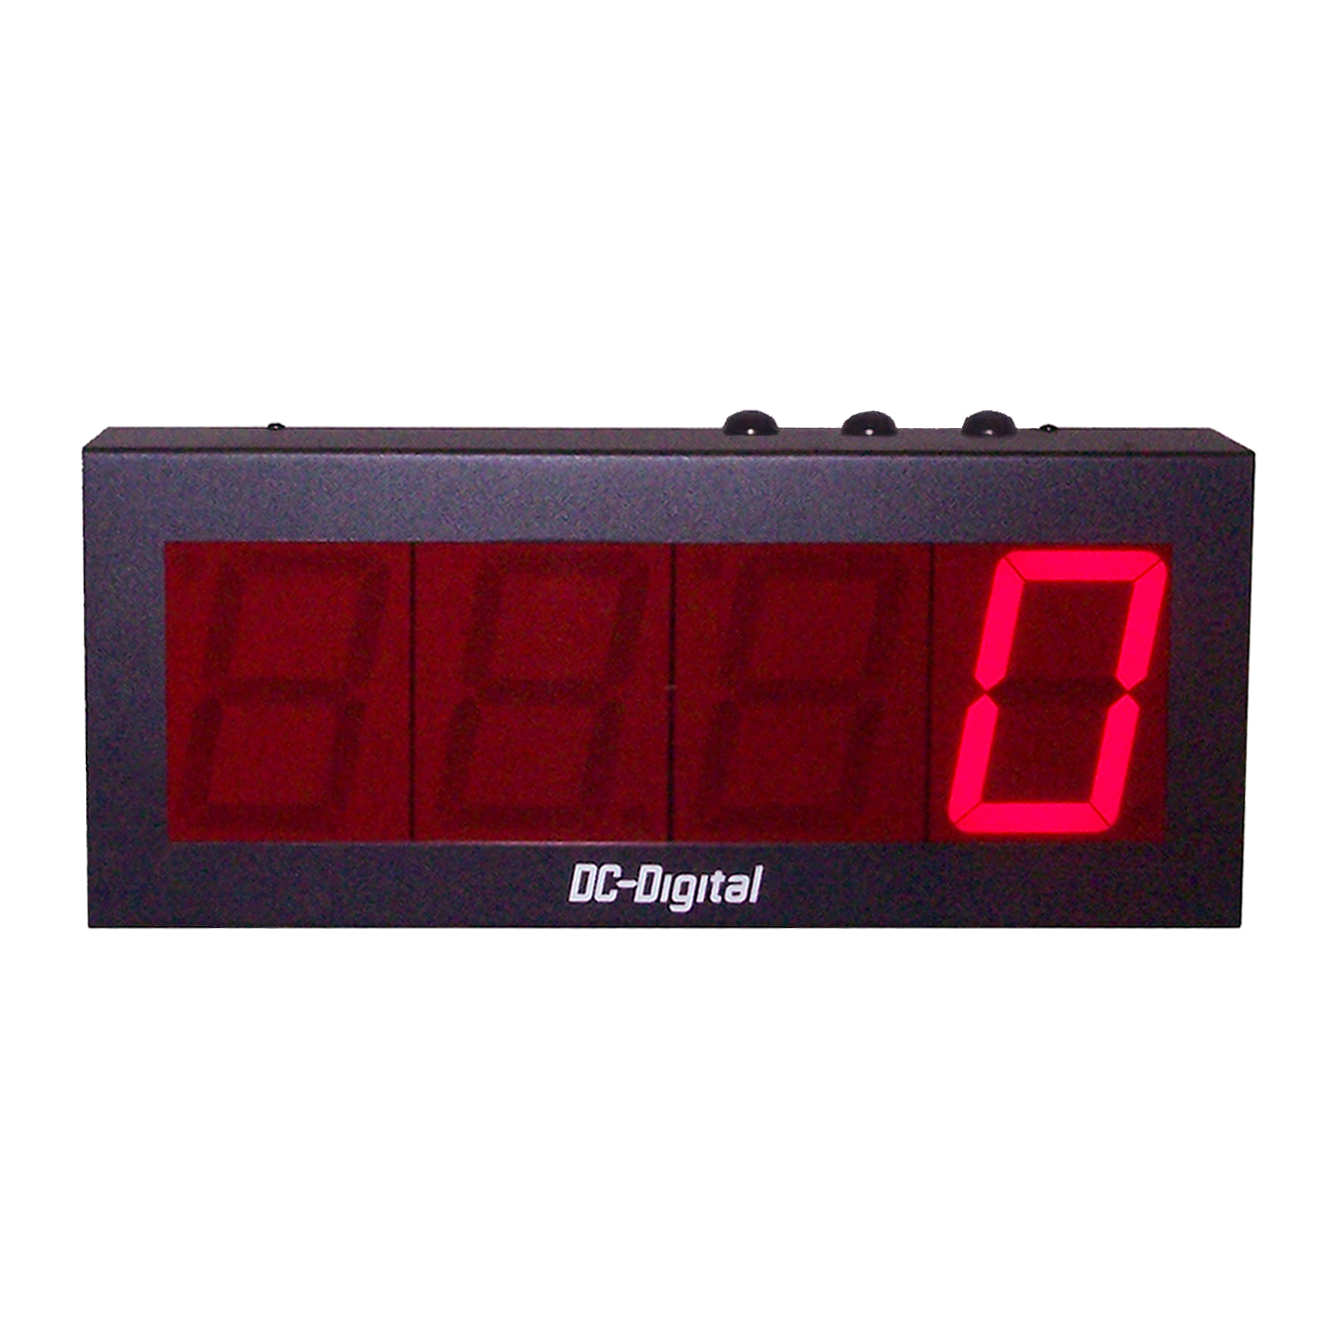 (DC-40T-UP-DAYS) 4.0 Inch LED Digital, Environmentally Sealed Push-Button Controlled, Count Up by Days Timer